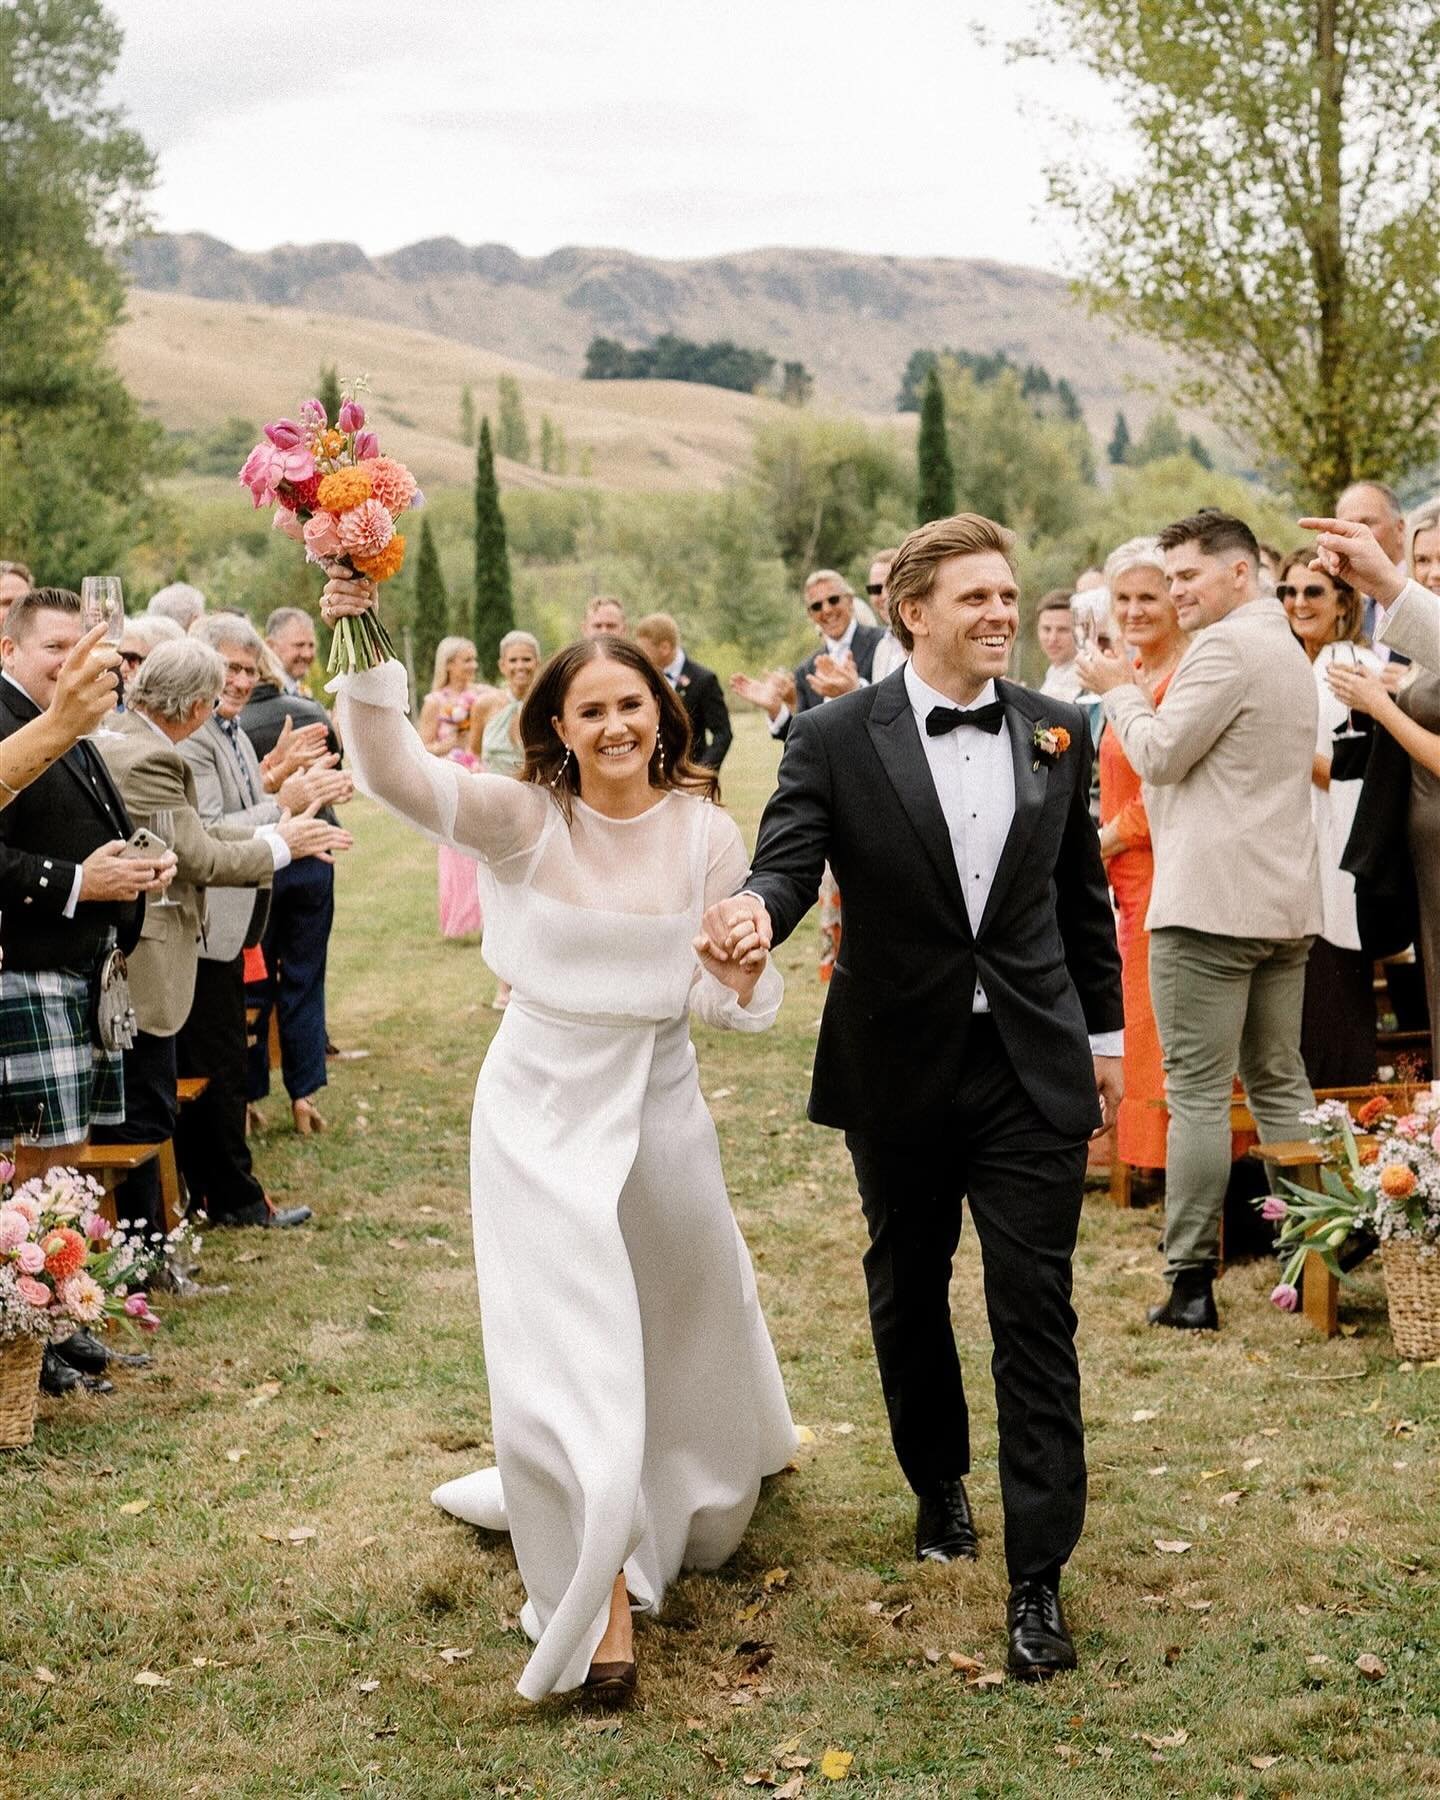 Friday with Samantha and Sam ✨

Photography @nataliemcnally_ 
Styling, Hire and Co-ordination @flockevents 
Catering @ortonshawkesbay 
Dress @kennyandharlowbridal 
Marquee @flagship_events 
Venue @theriverhouse_hb 
Bar @supernovaevents.nz 
Celebrant 